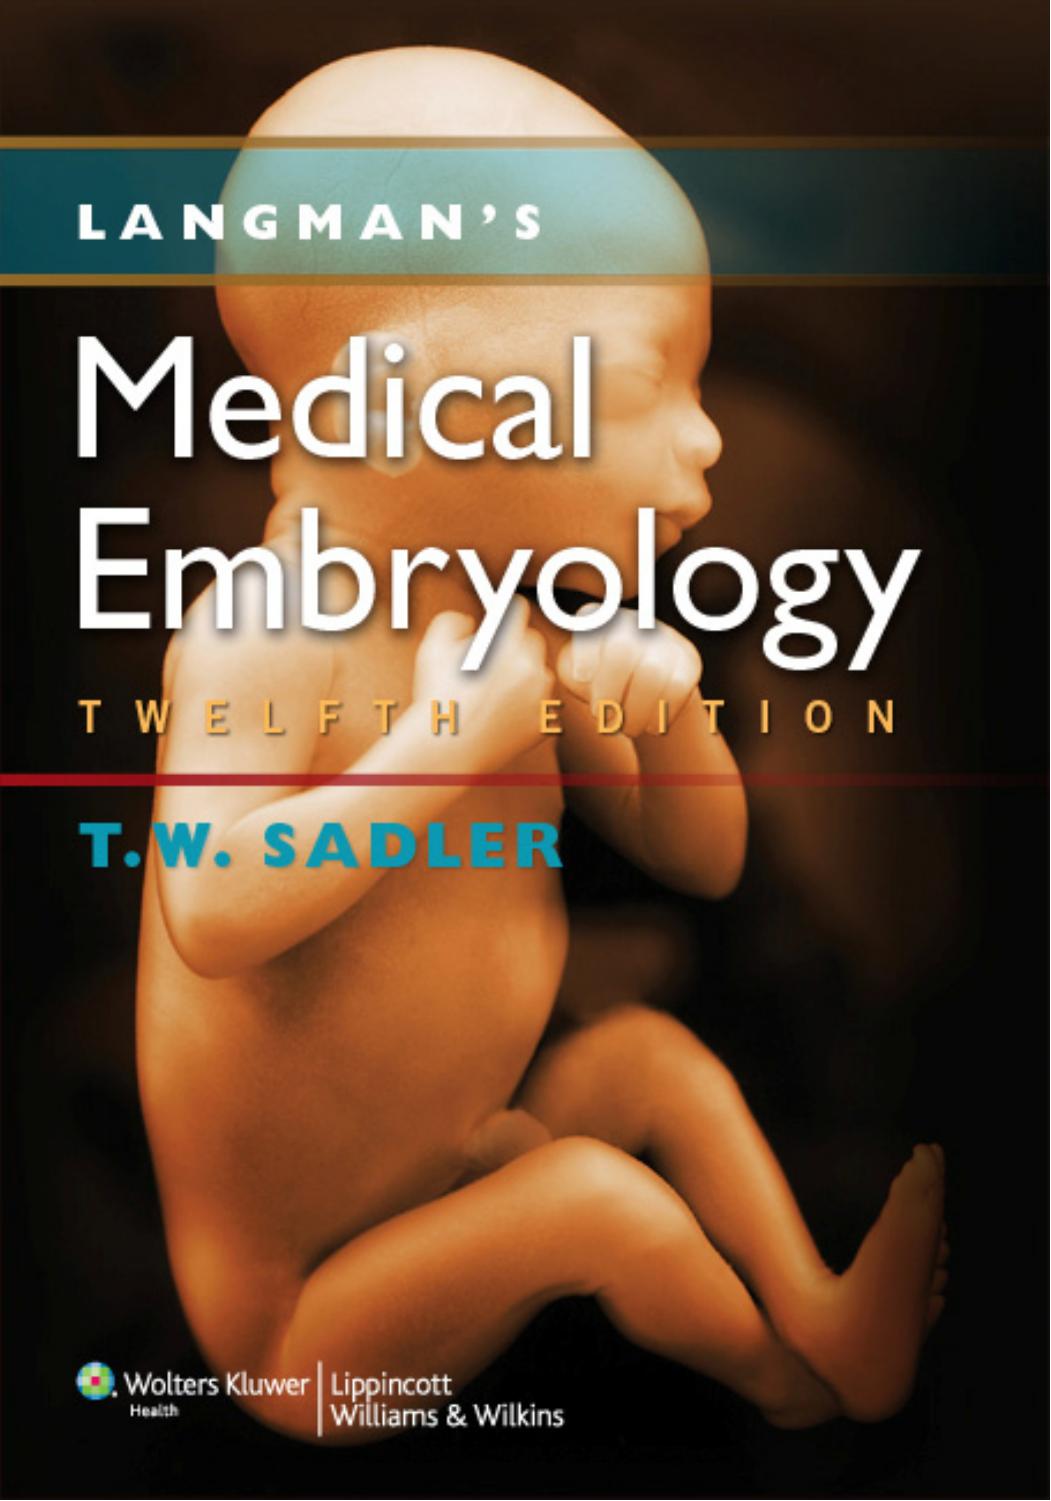 Langman's Medical Embryology, 12th Edition